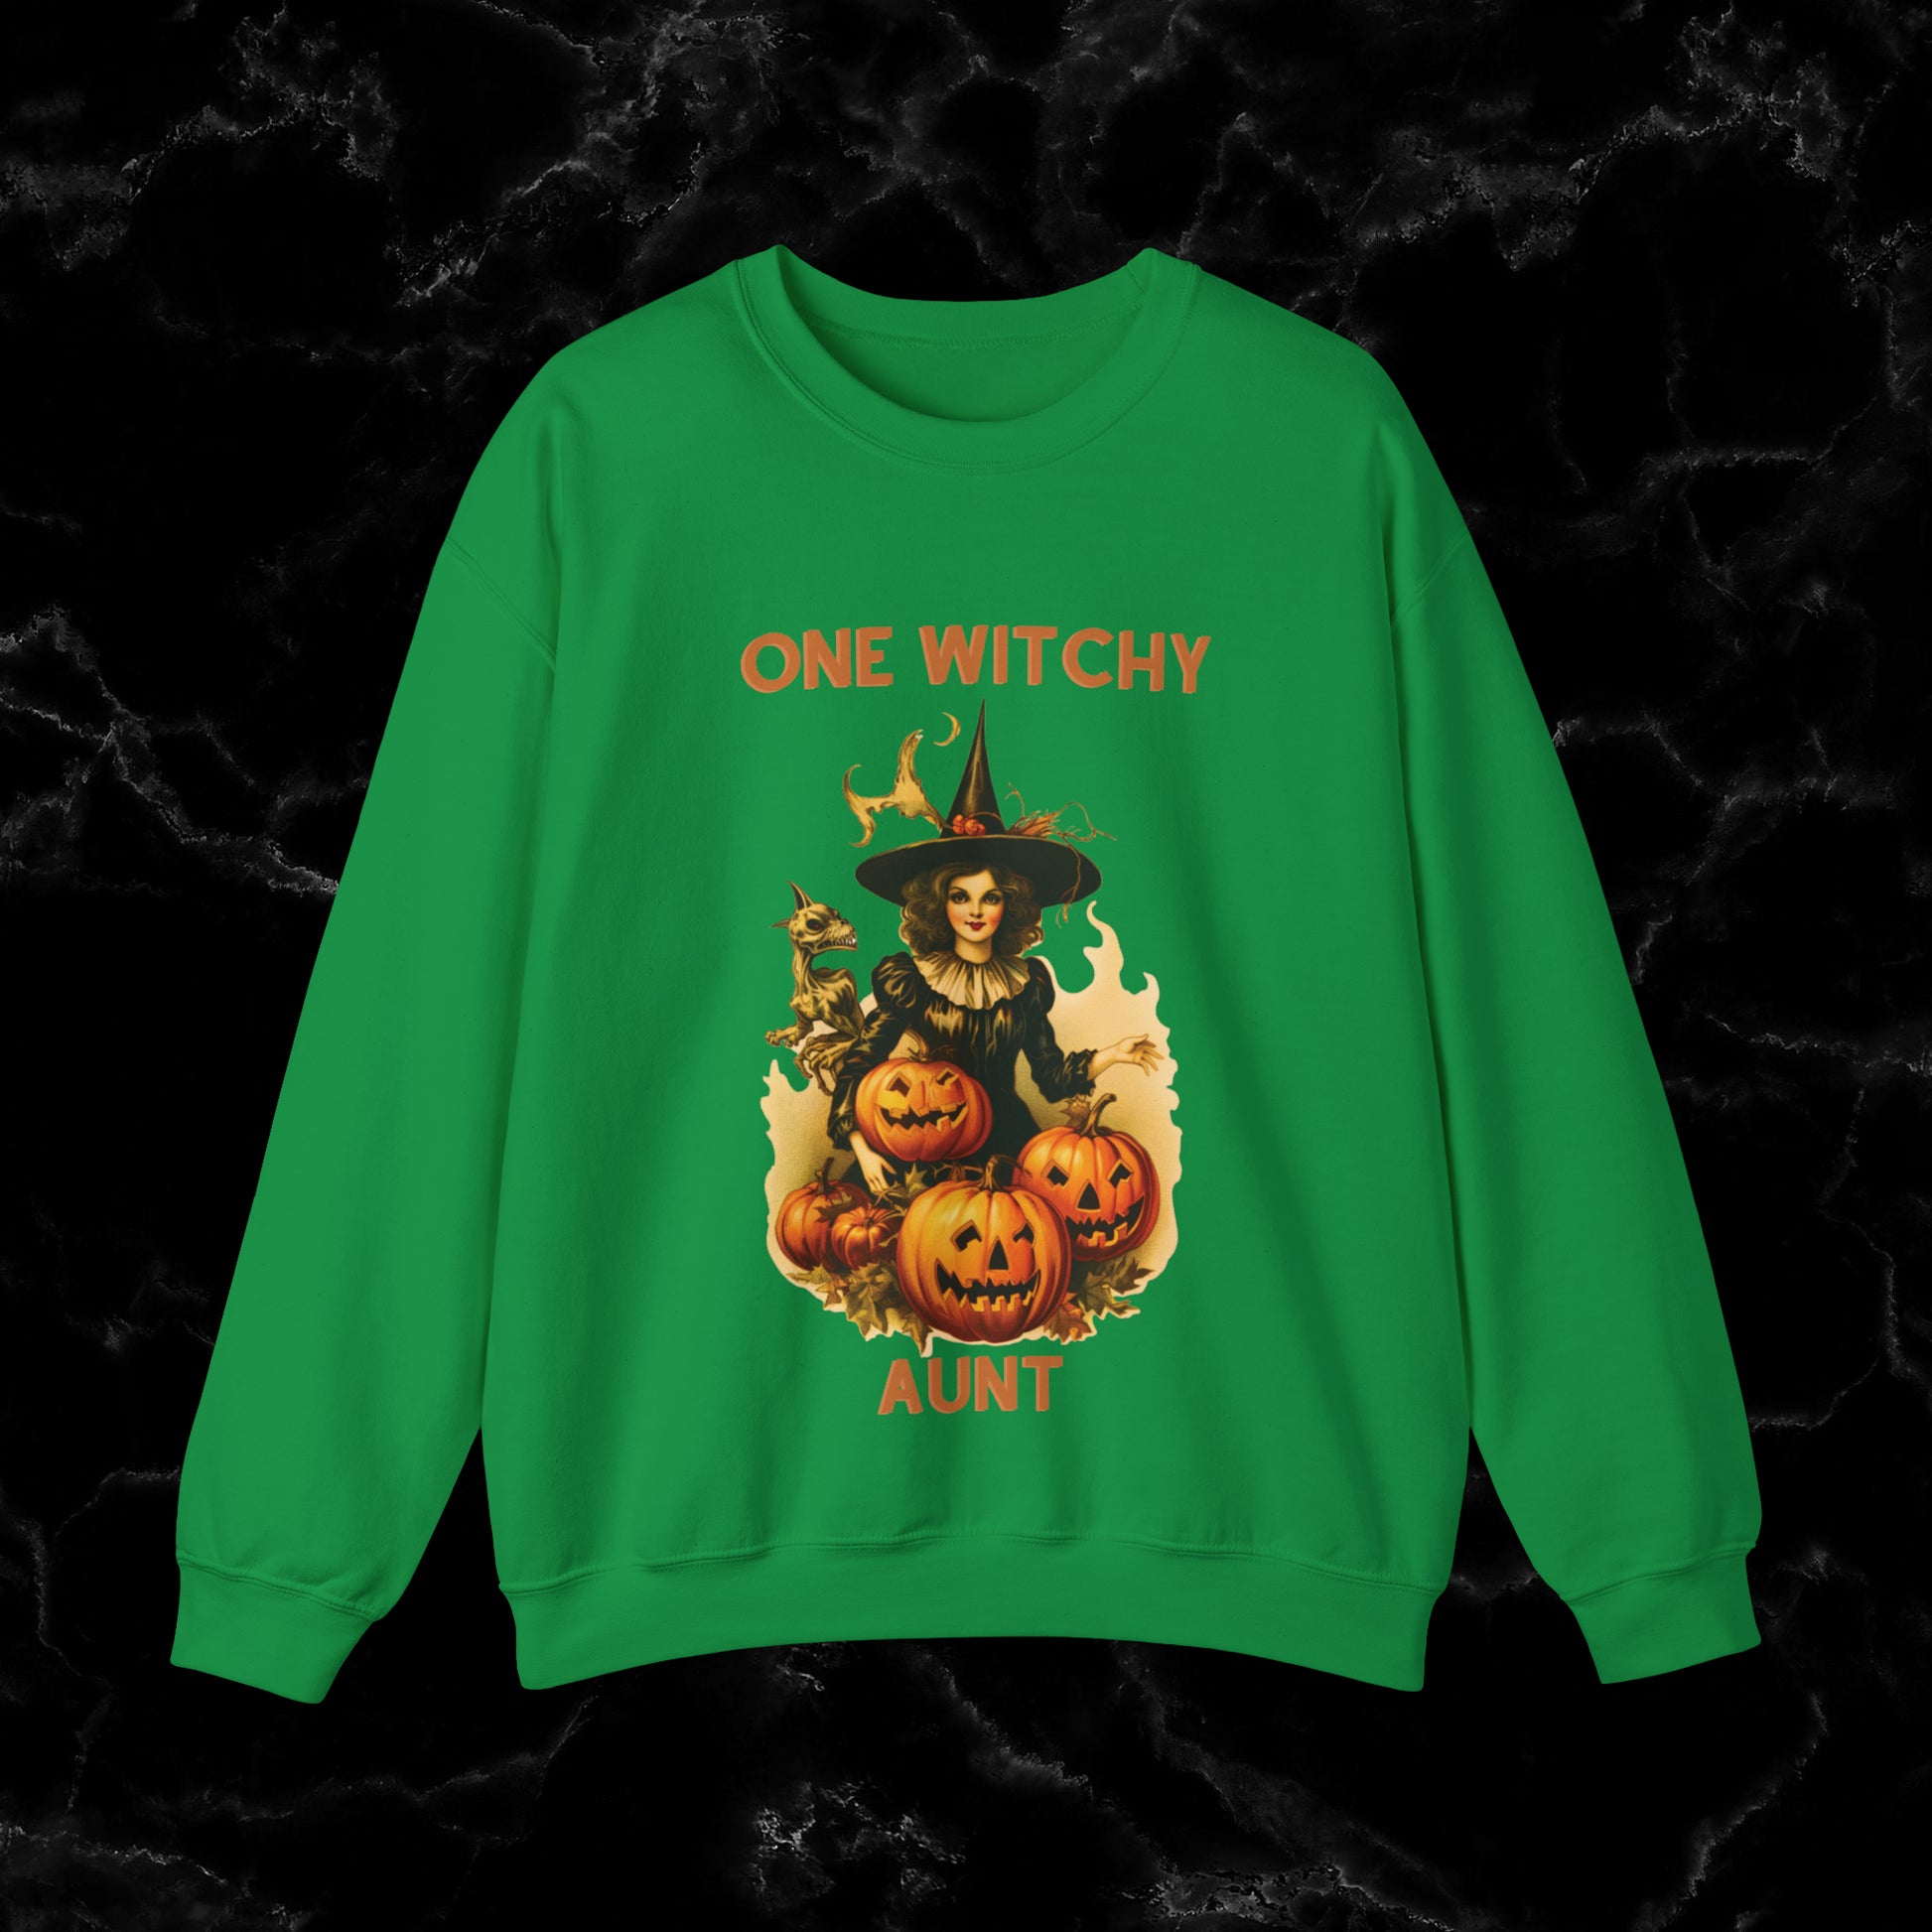 One Witchy Aunt Sweatshirt - Cool Aunt Shirt, Feral Aunt Sweatshirt, Perfect Gifts for Aunts, Auntie Sweatshirt Sweatshirt S Irish Green 